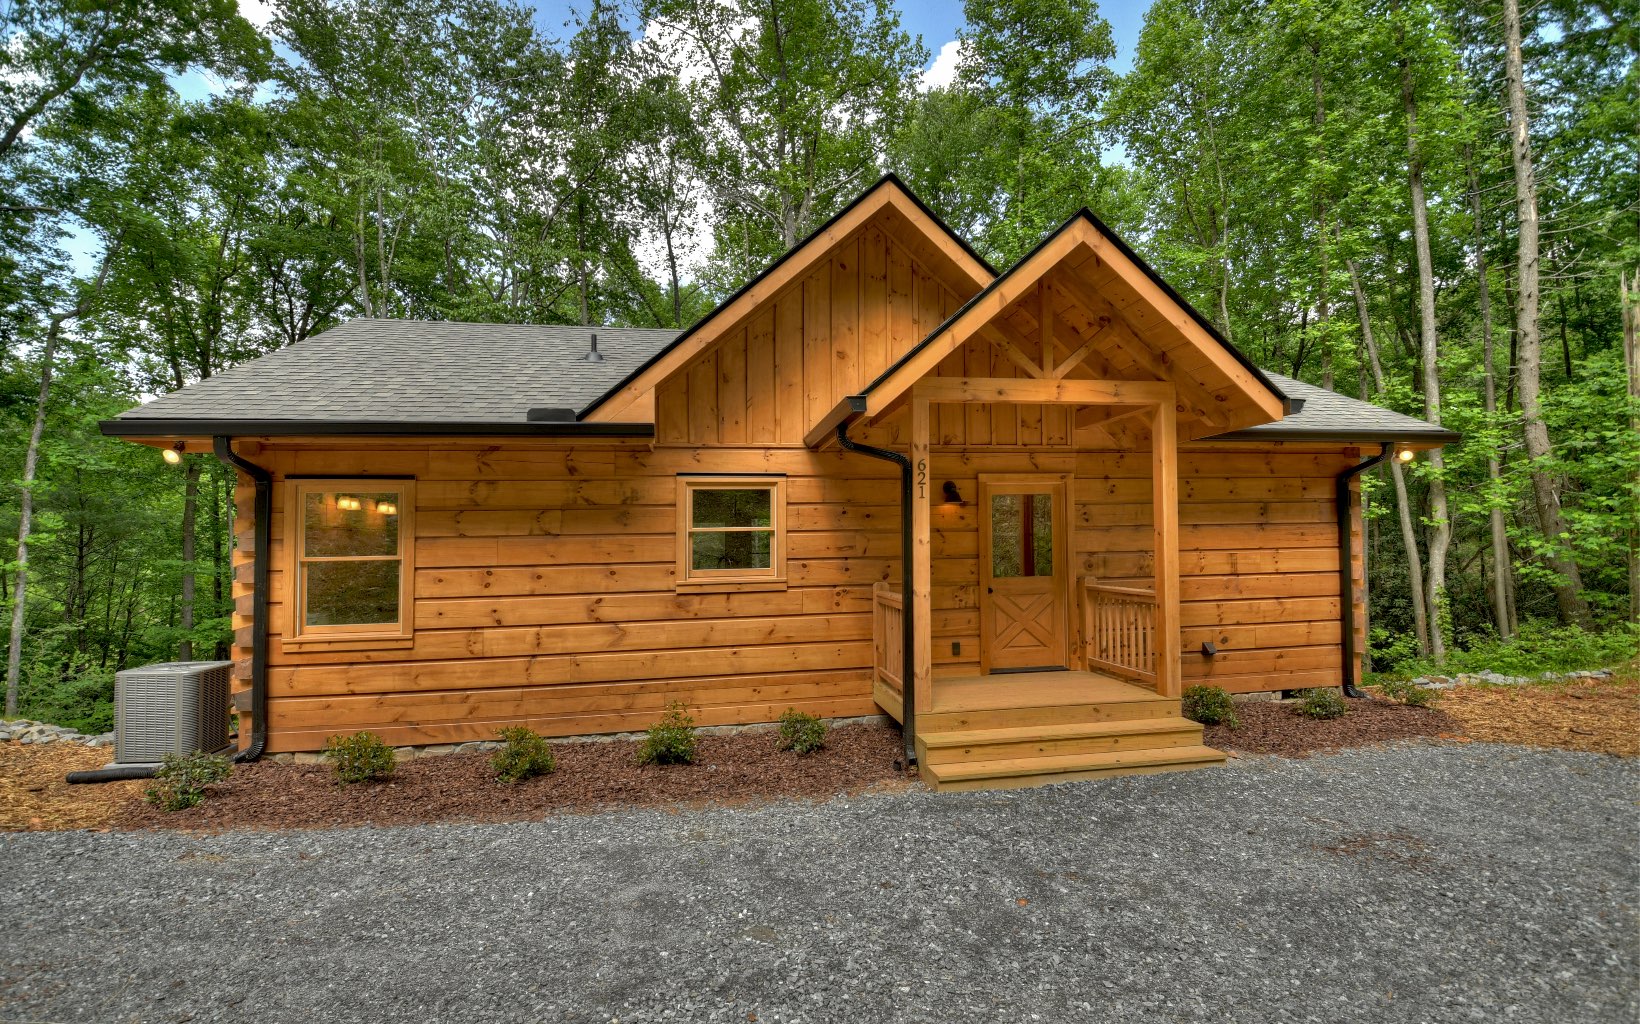 New log cabin sitting on Bucktown Creek with beautiful creek sounds. great rental floor plan. Popular split 2/2 with soaring greatroom and corner rock fireplace with gas logs, open to kitchen with custom cabinets. Wood floors throughout. Porch goes all the way across the back with plenty of space to enjoy the beautiful foliage and creek sounds.